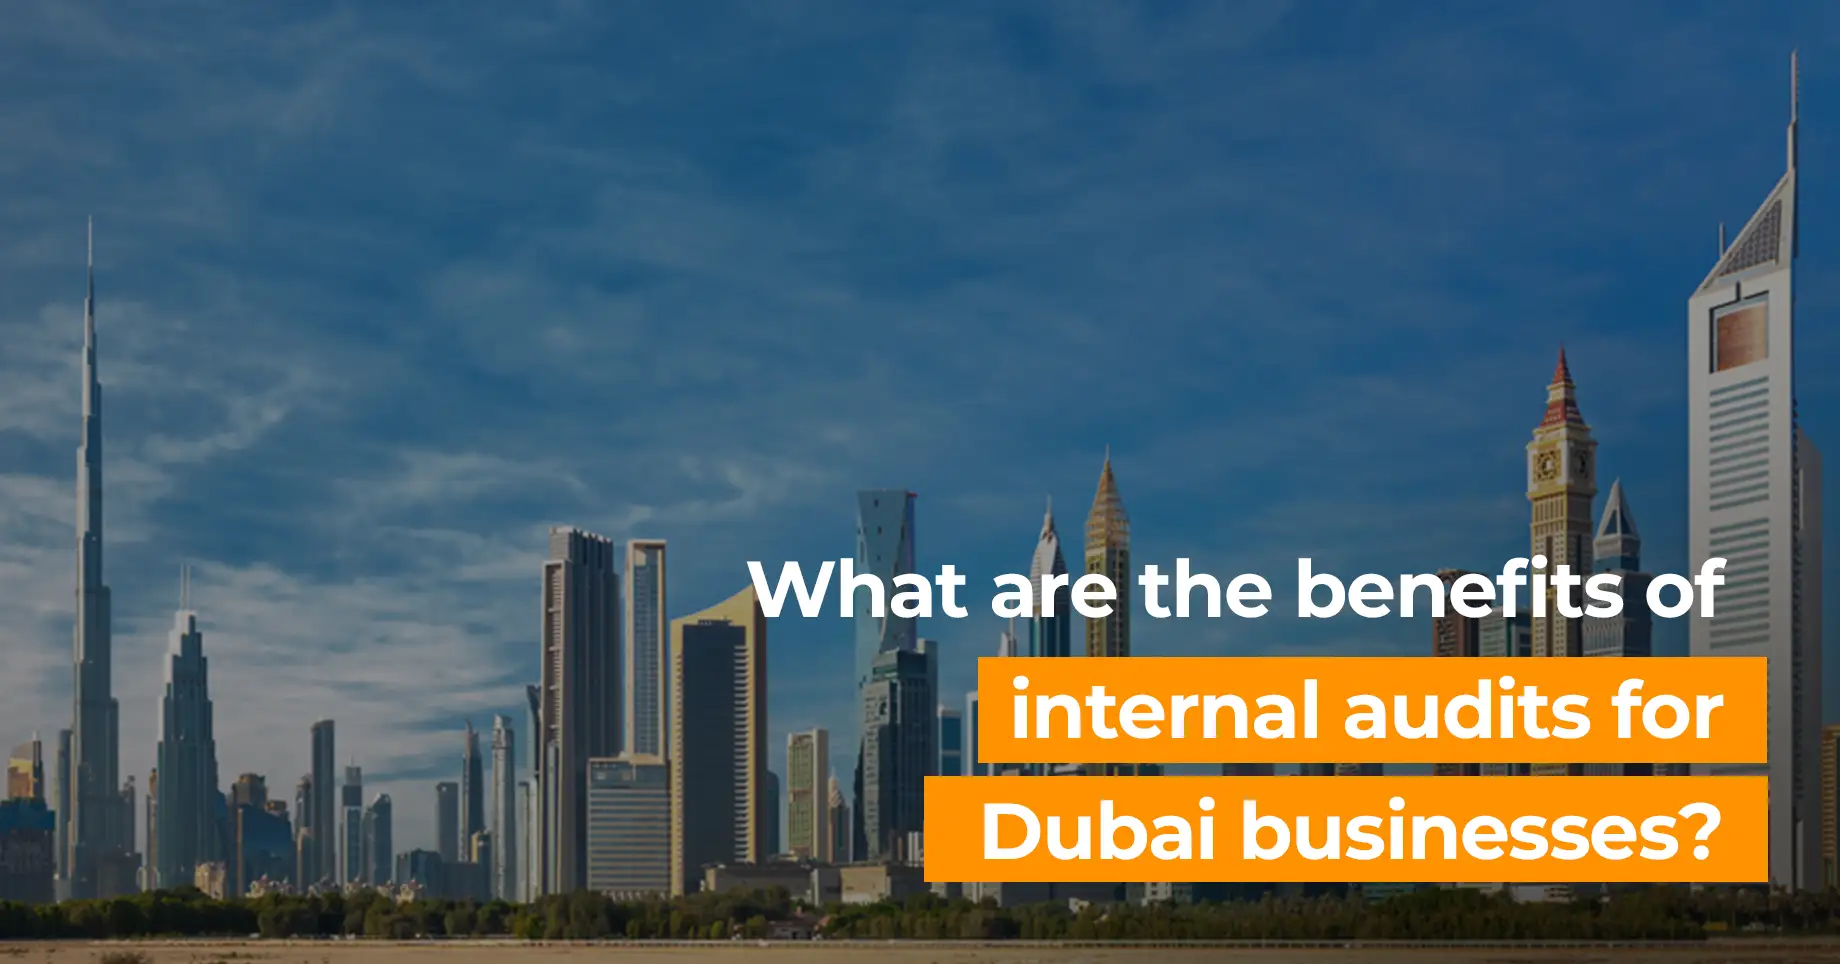 What are the benefits of internal audits for Dubai businesses?